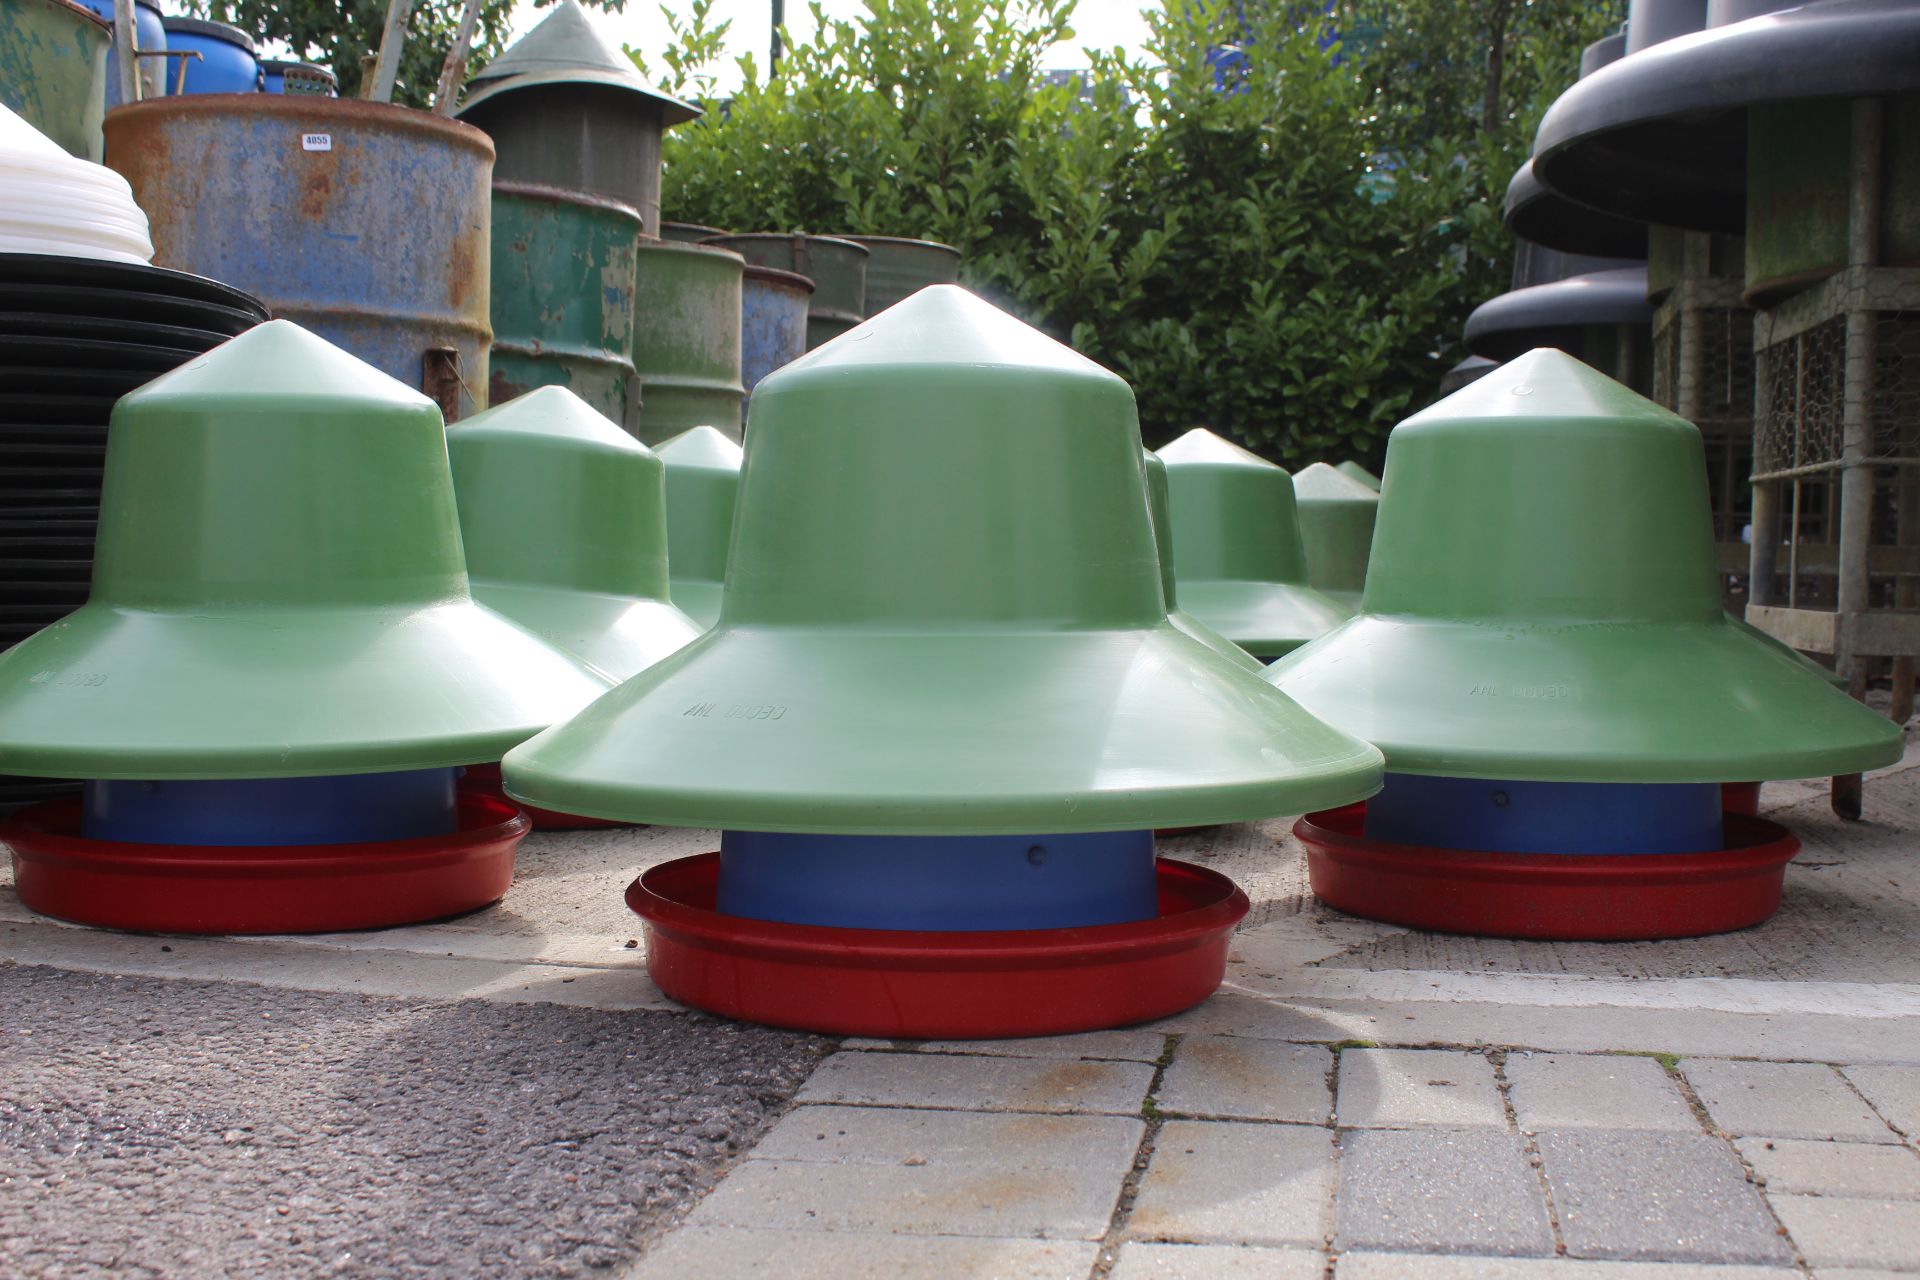 12 x Manola Feeder Outdoor feeders with green top hat covers by Quill Productions